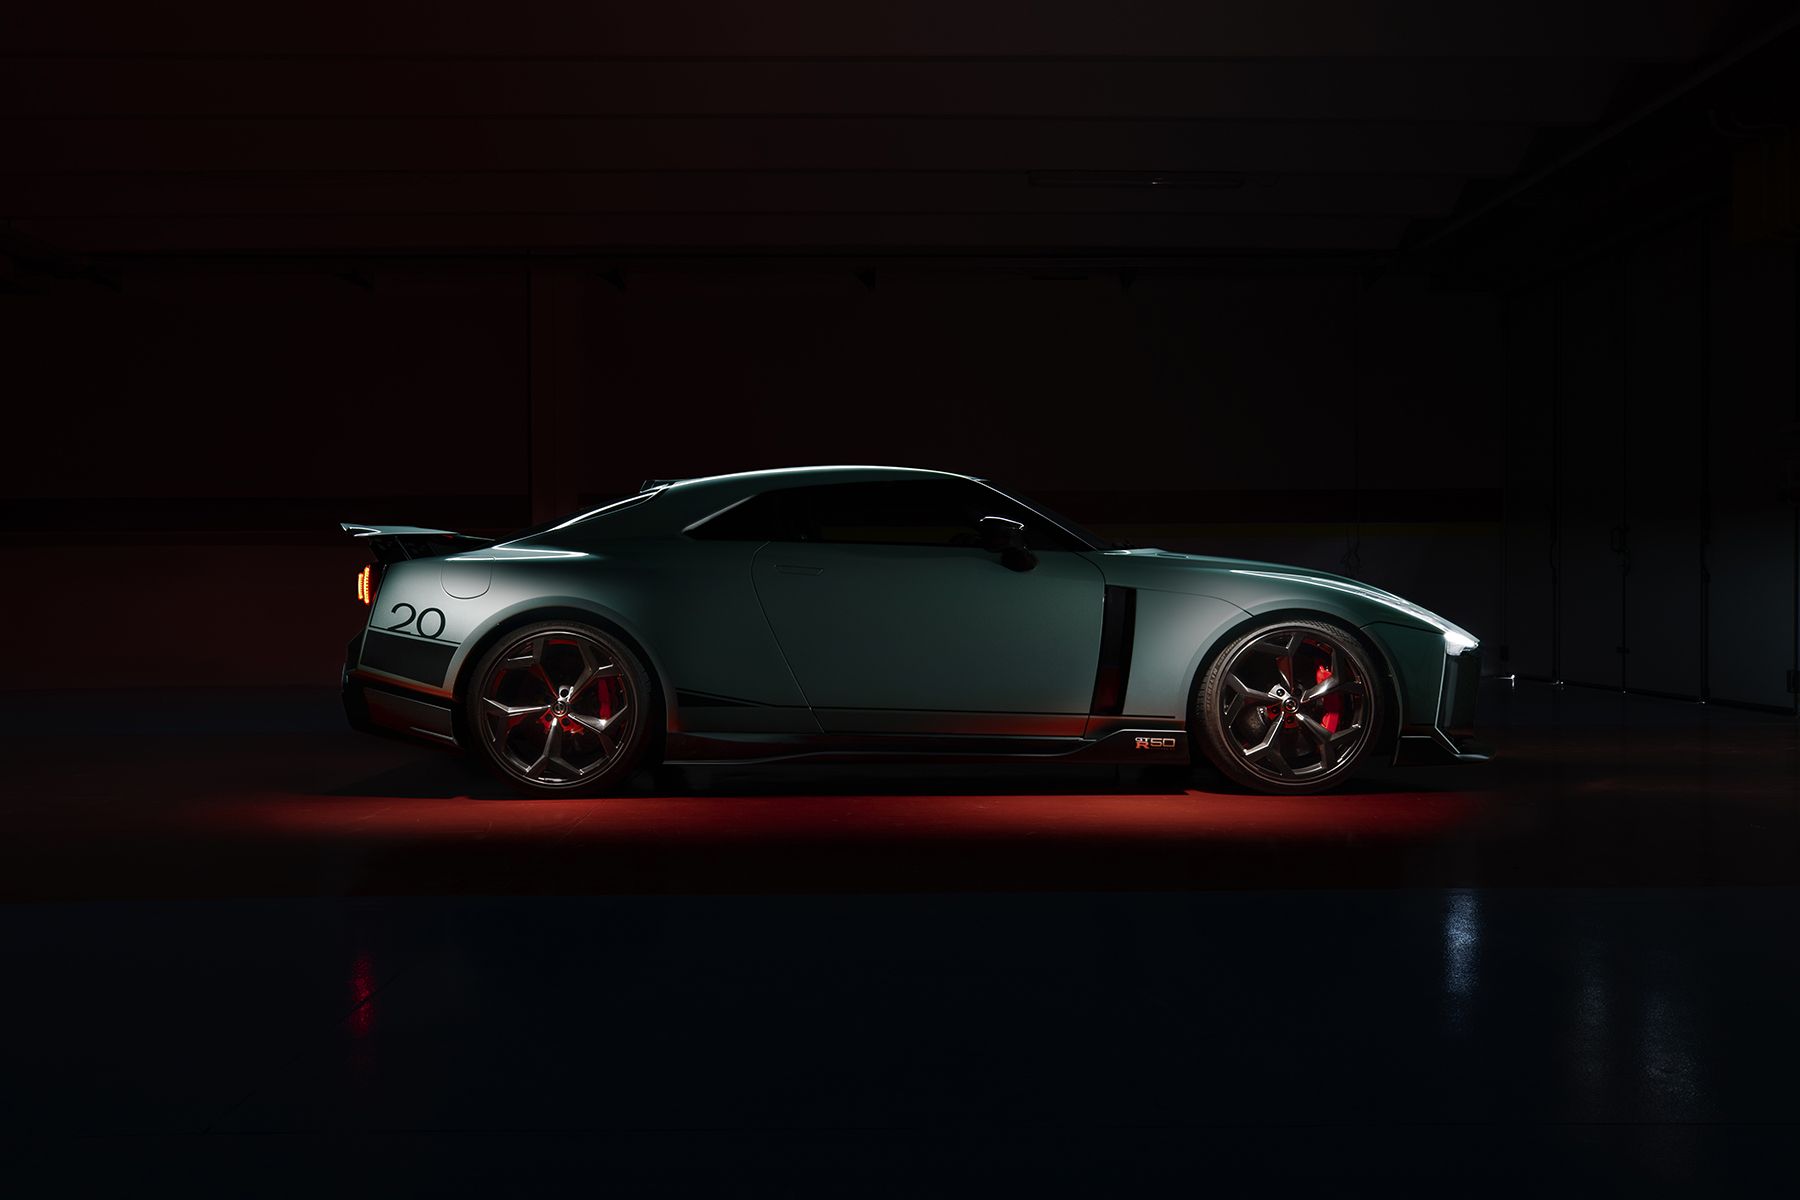 Nissan is working on an electrified GT-R successor